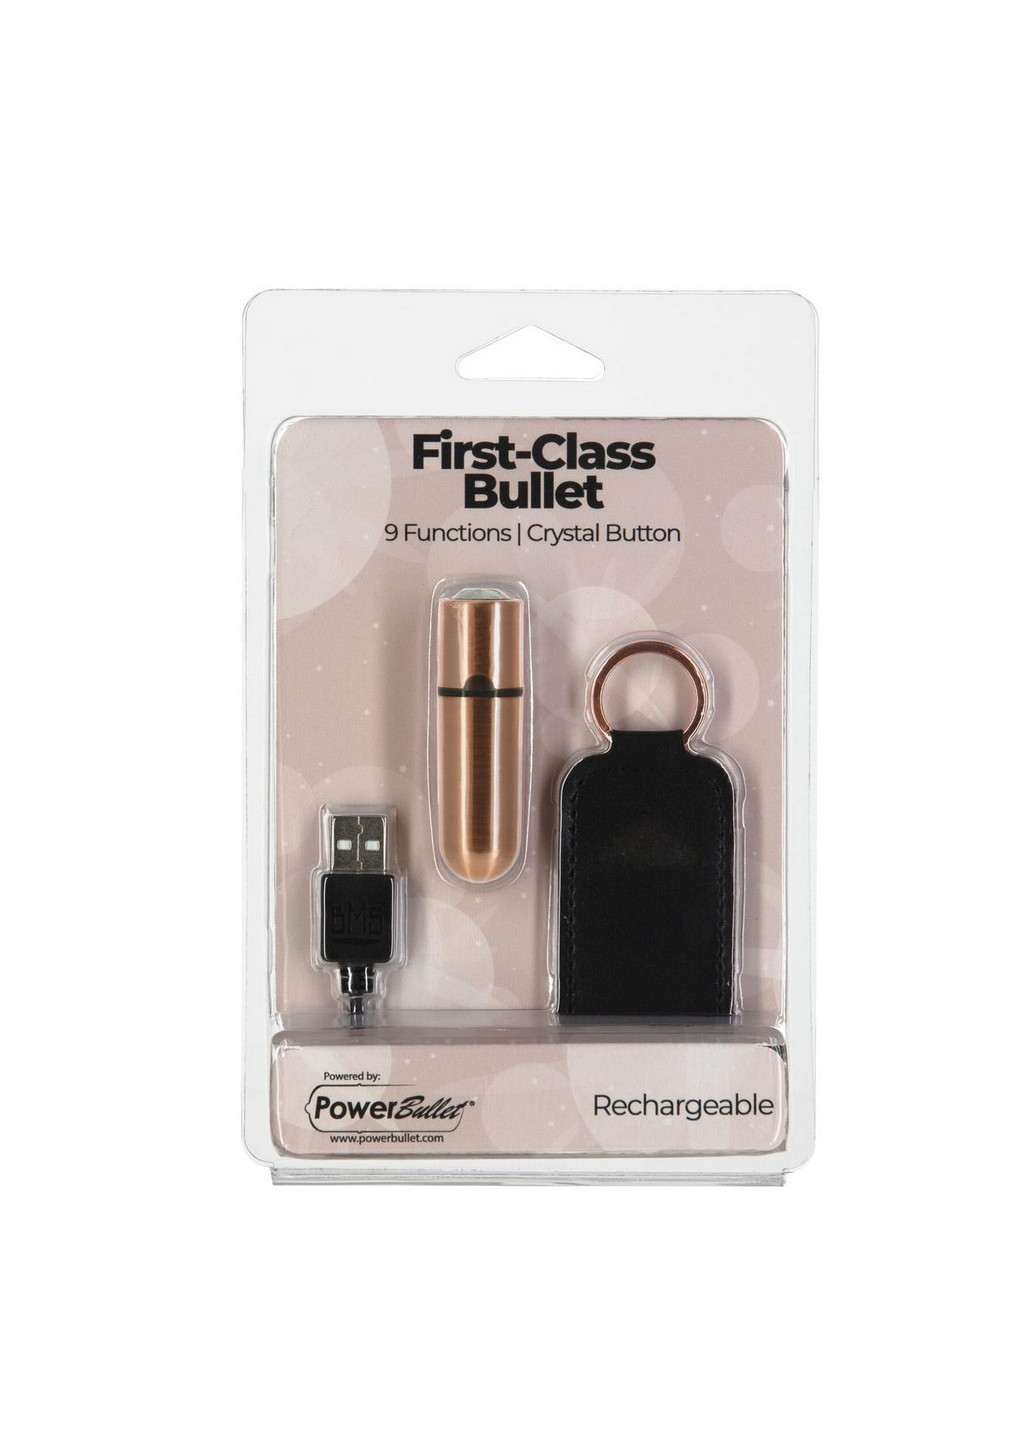 Віброкуль - First-Class Bullet 2.5" with Key Chain Pouch PowerBullet (260450759)